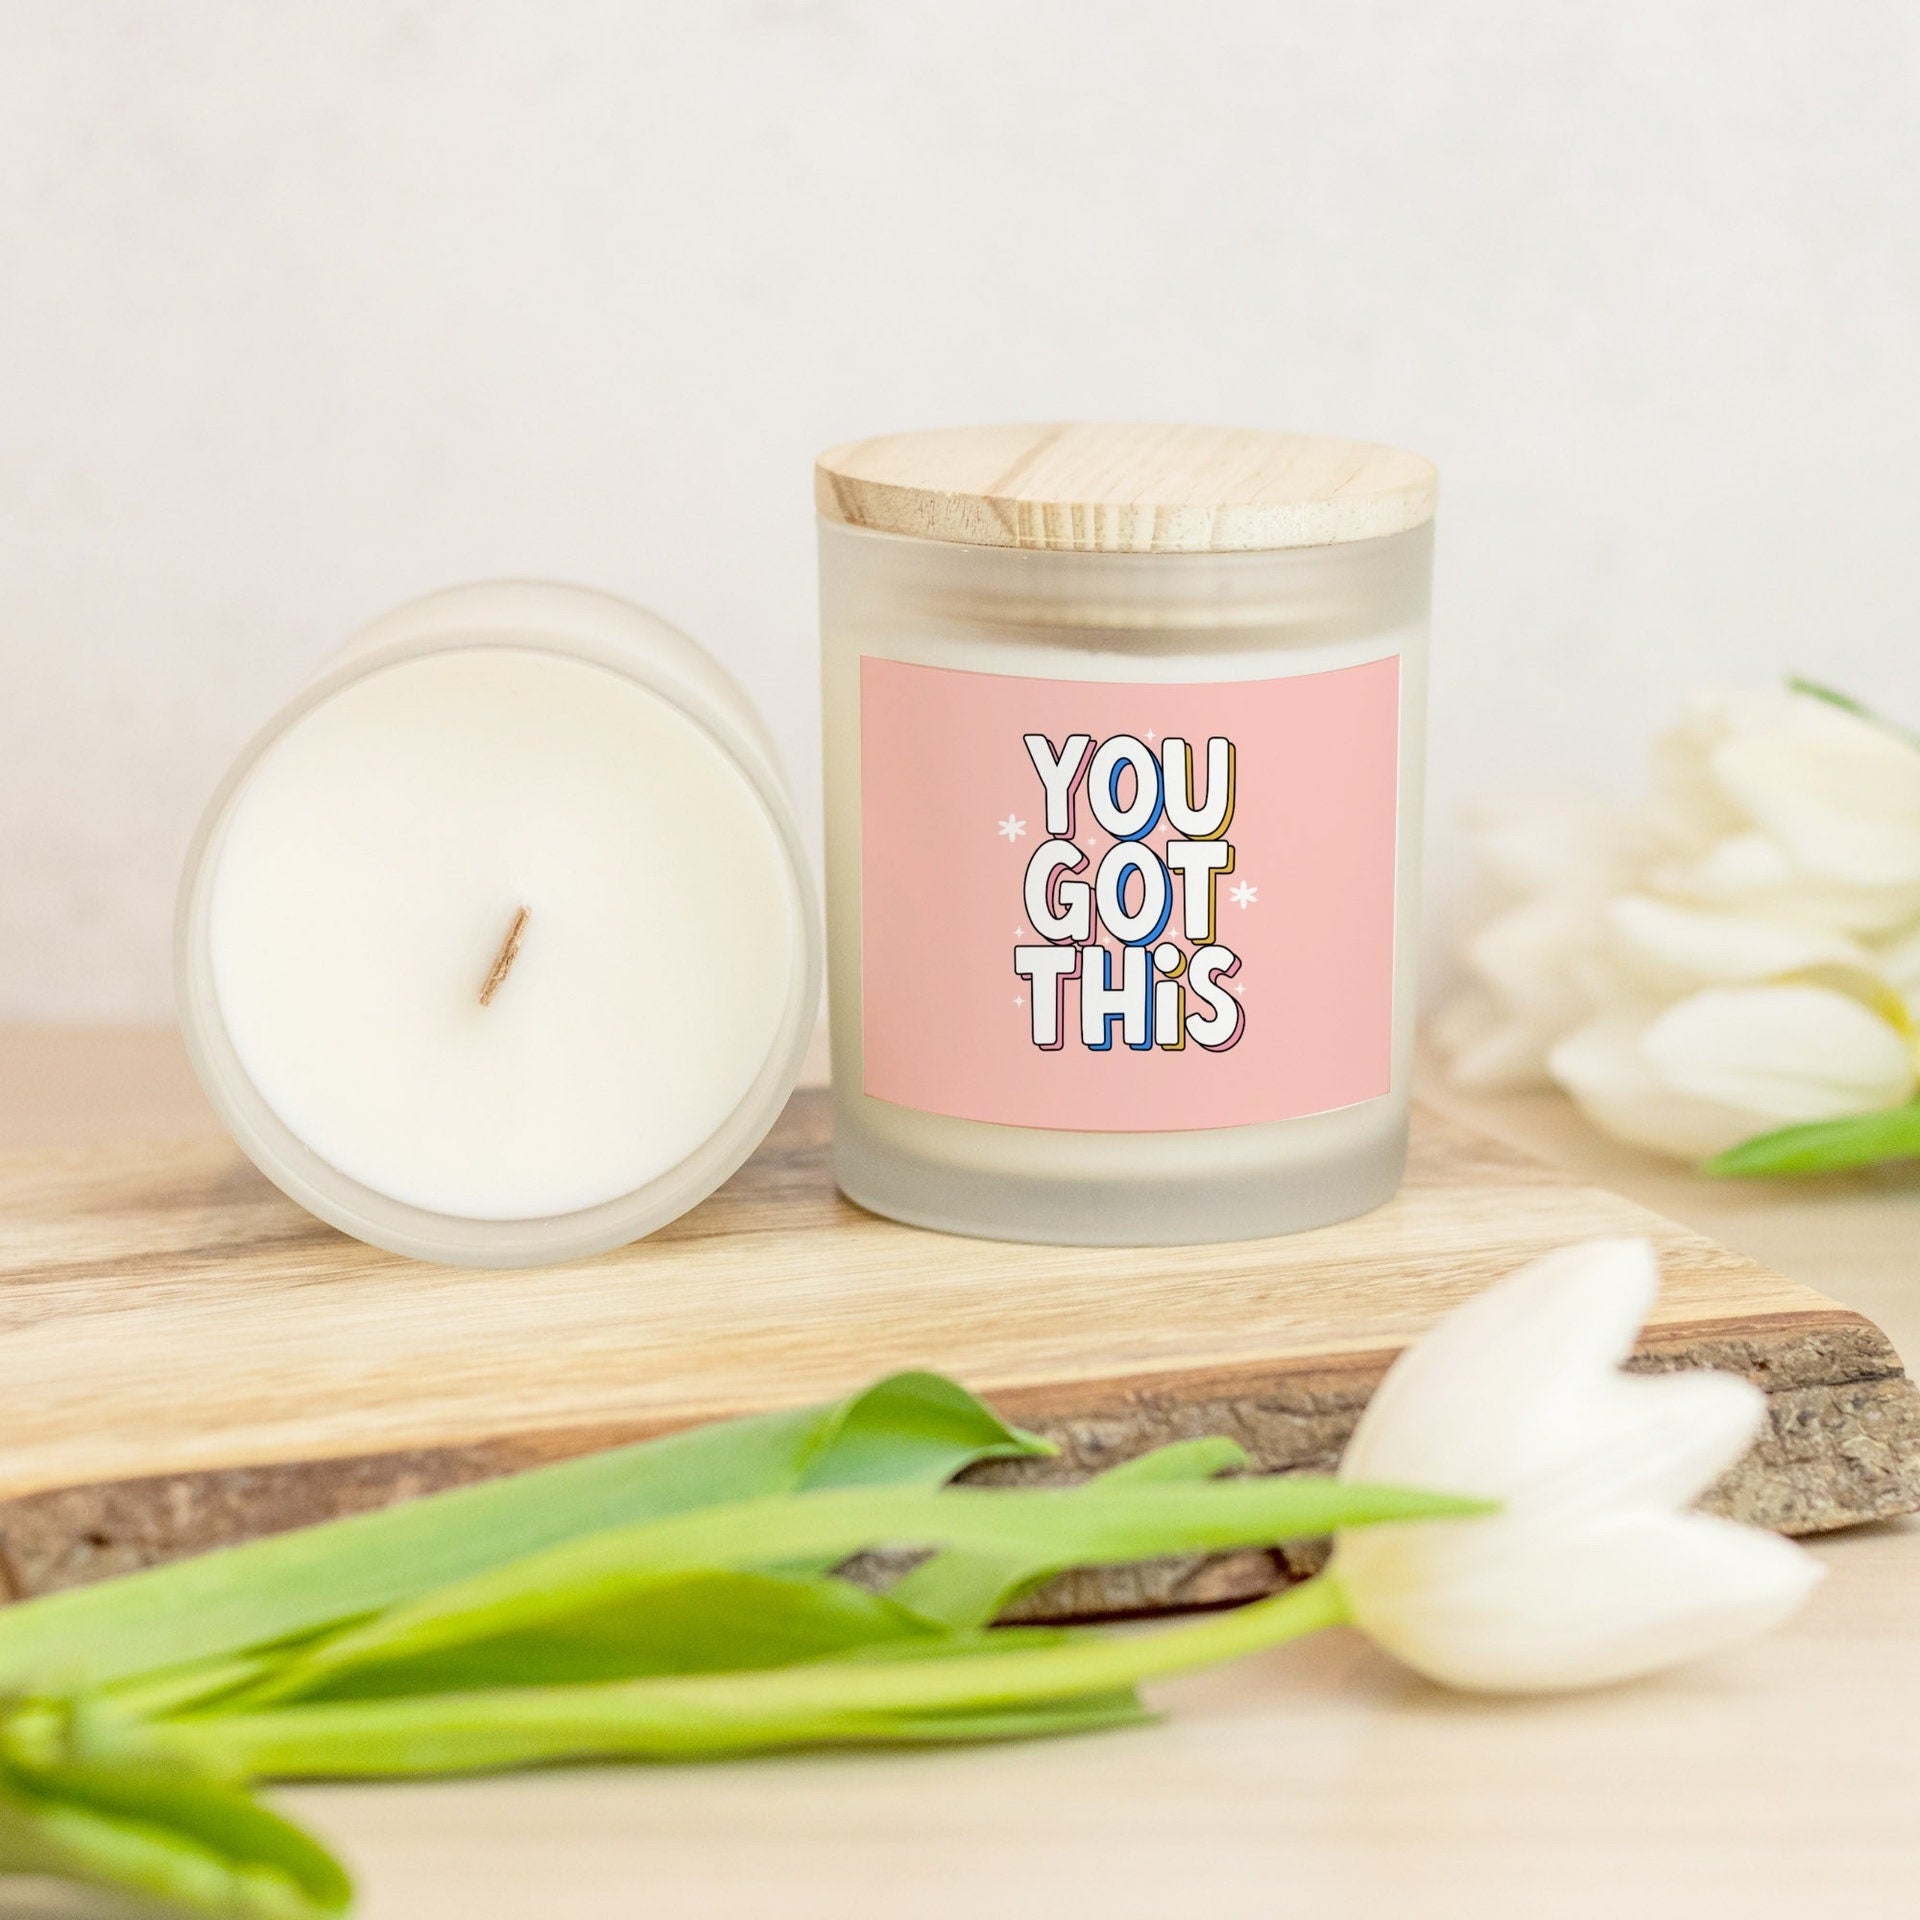 You Got This Candle, Christmas Gift, Birthday Gift, Soy Candle, Positivity Candle, Self Love, Gift, Love Language, Happy Gift